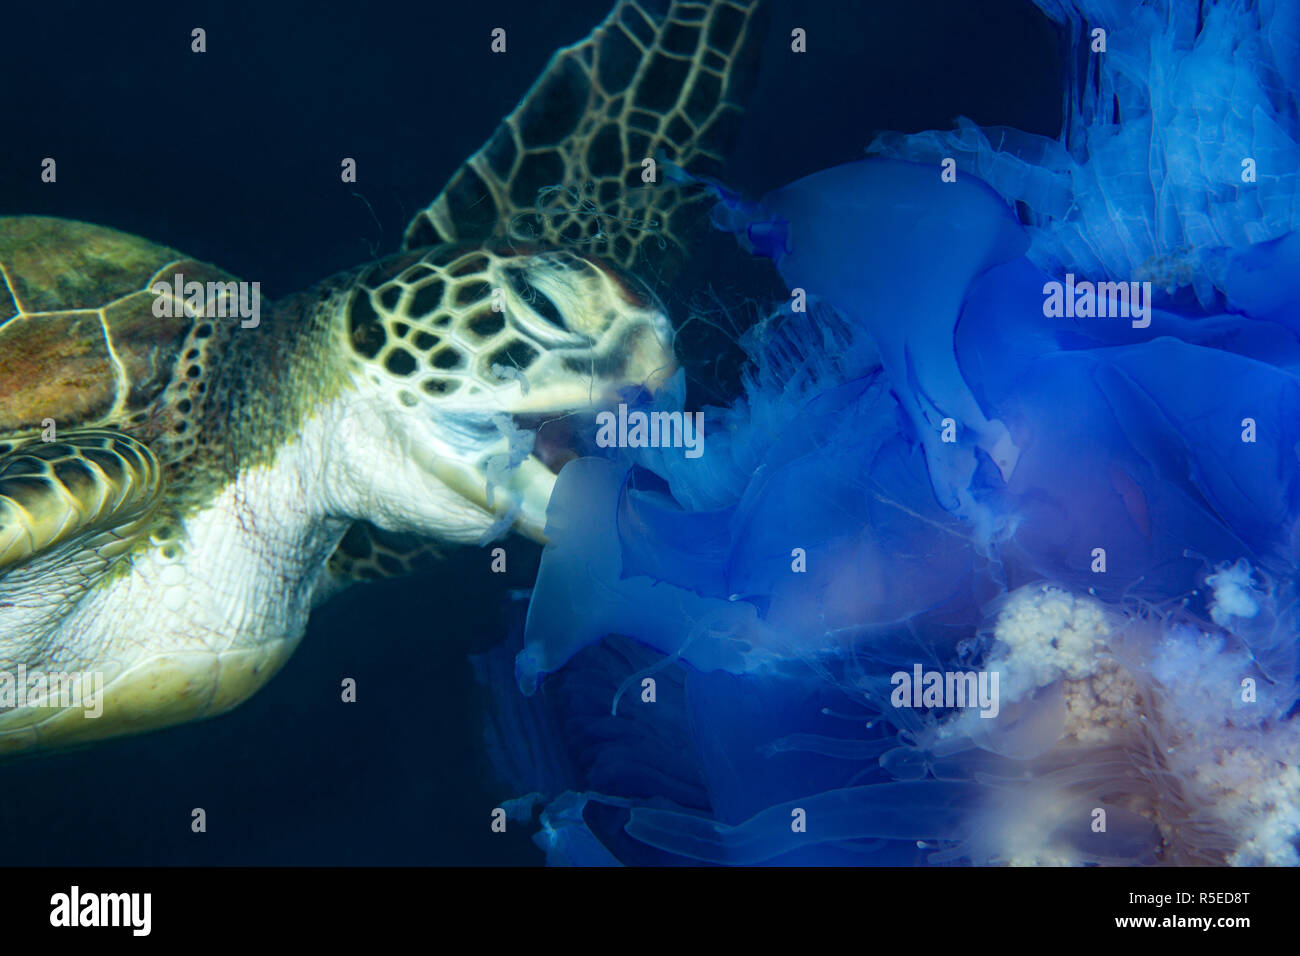 Green Turtle Eating a Blue Jellyfish Stock Photo